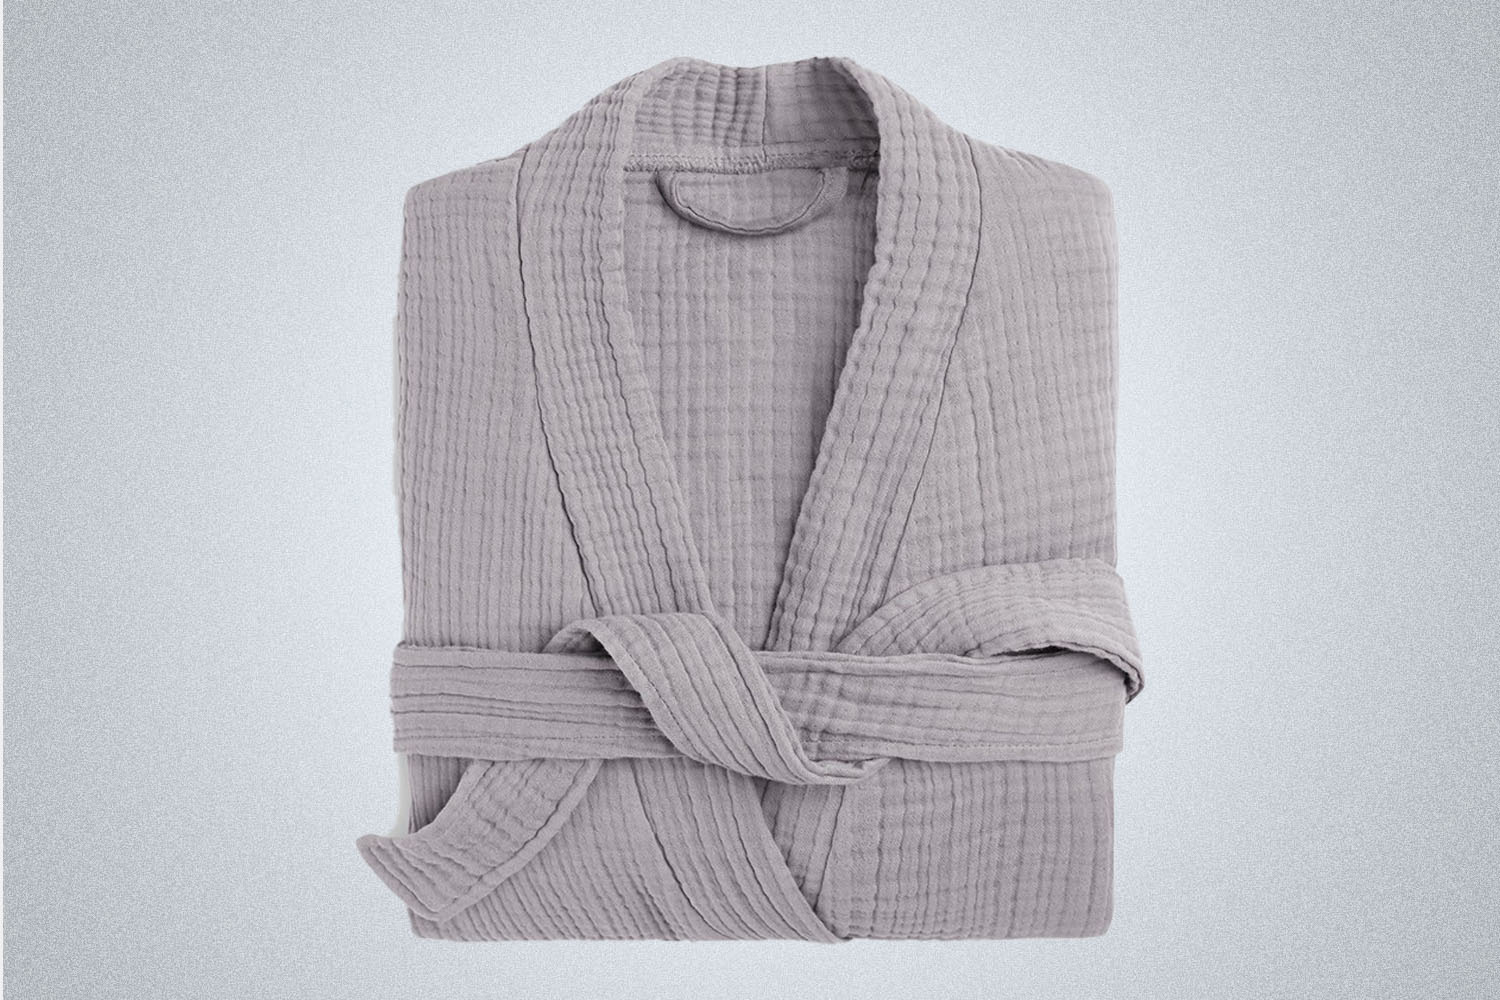 A grey Parachute robe on a grey background